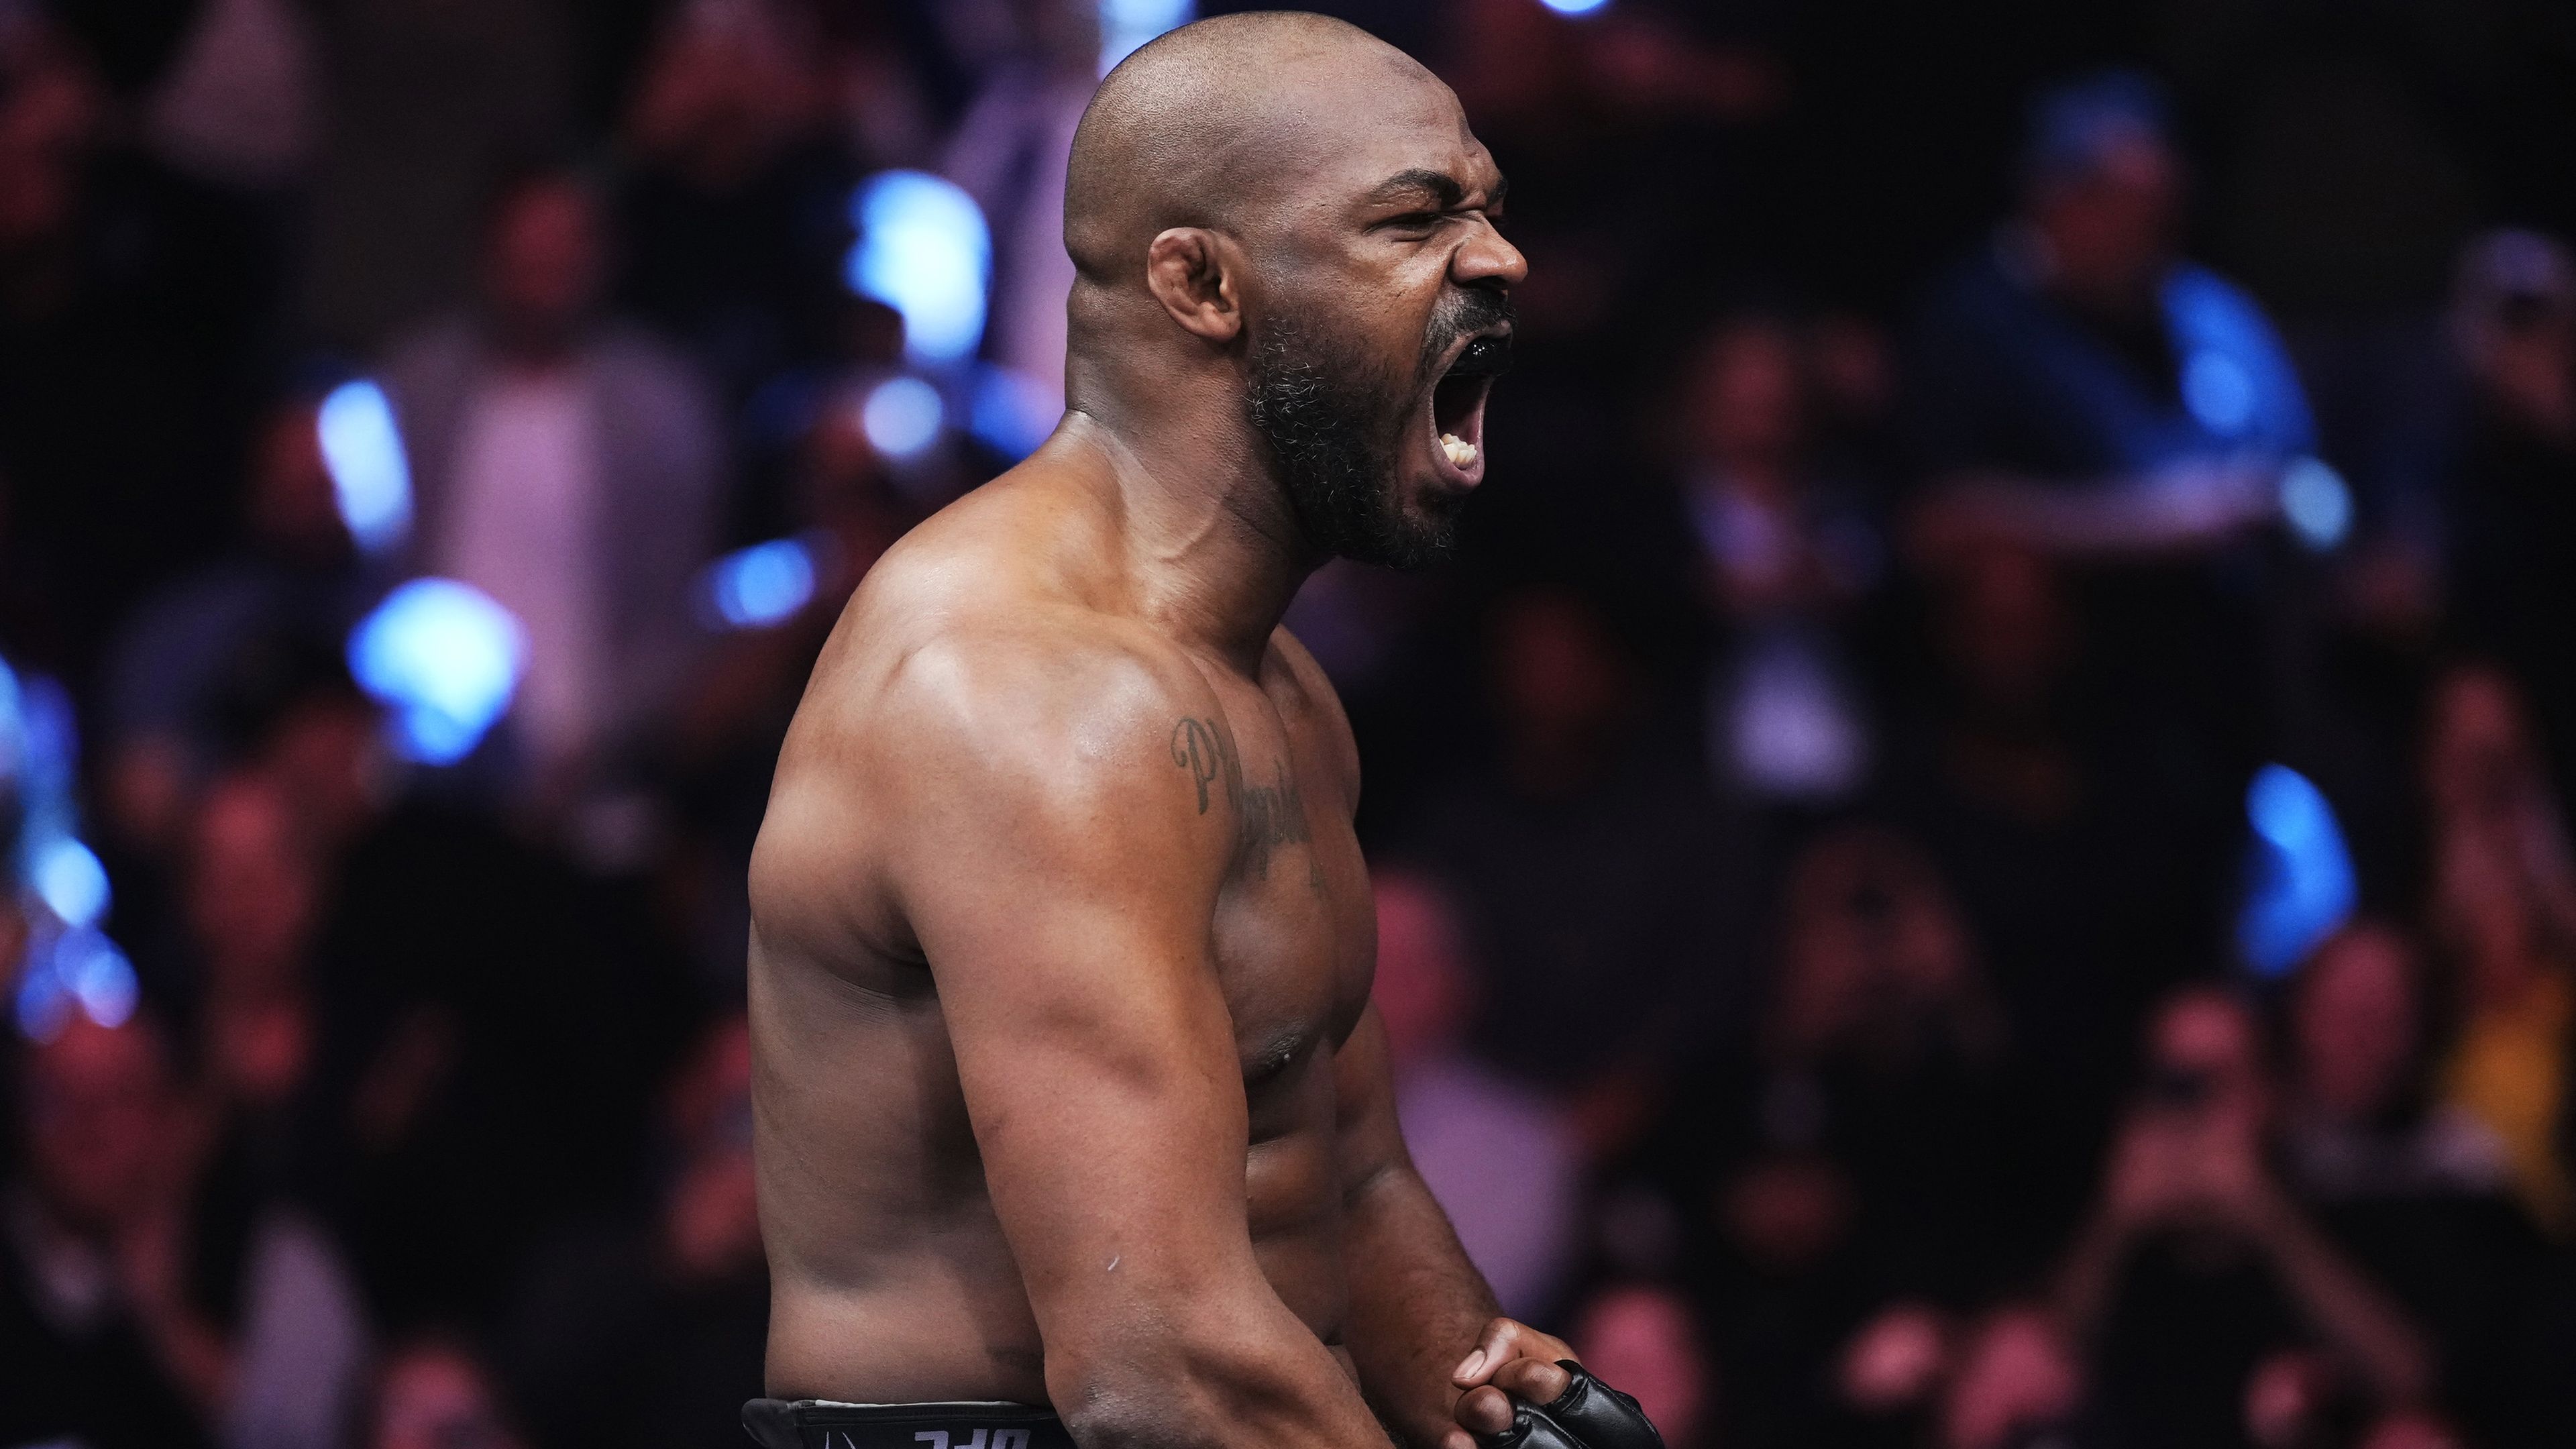 Jon Jones cements GOAT status with heavyweight title win in first UFC fight in three years